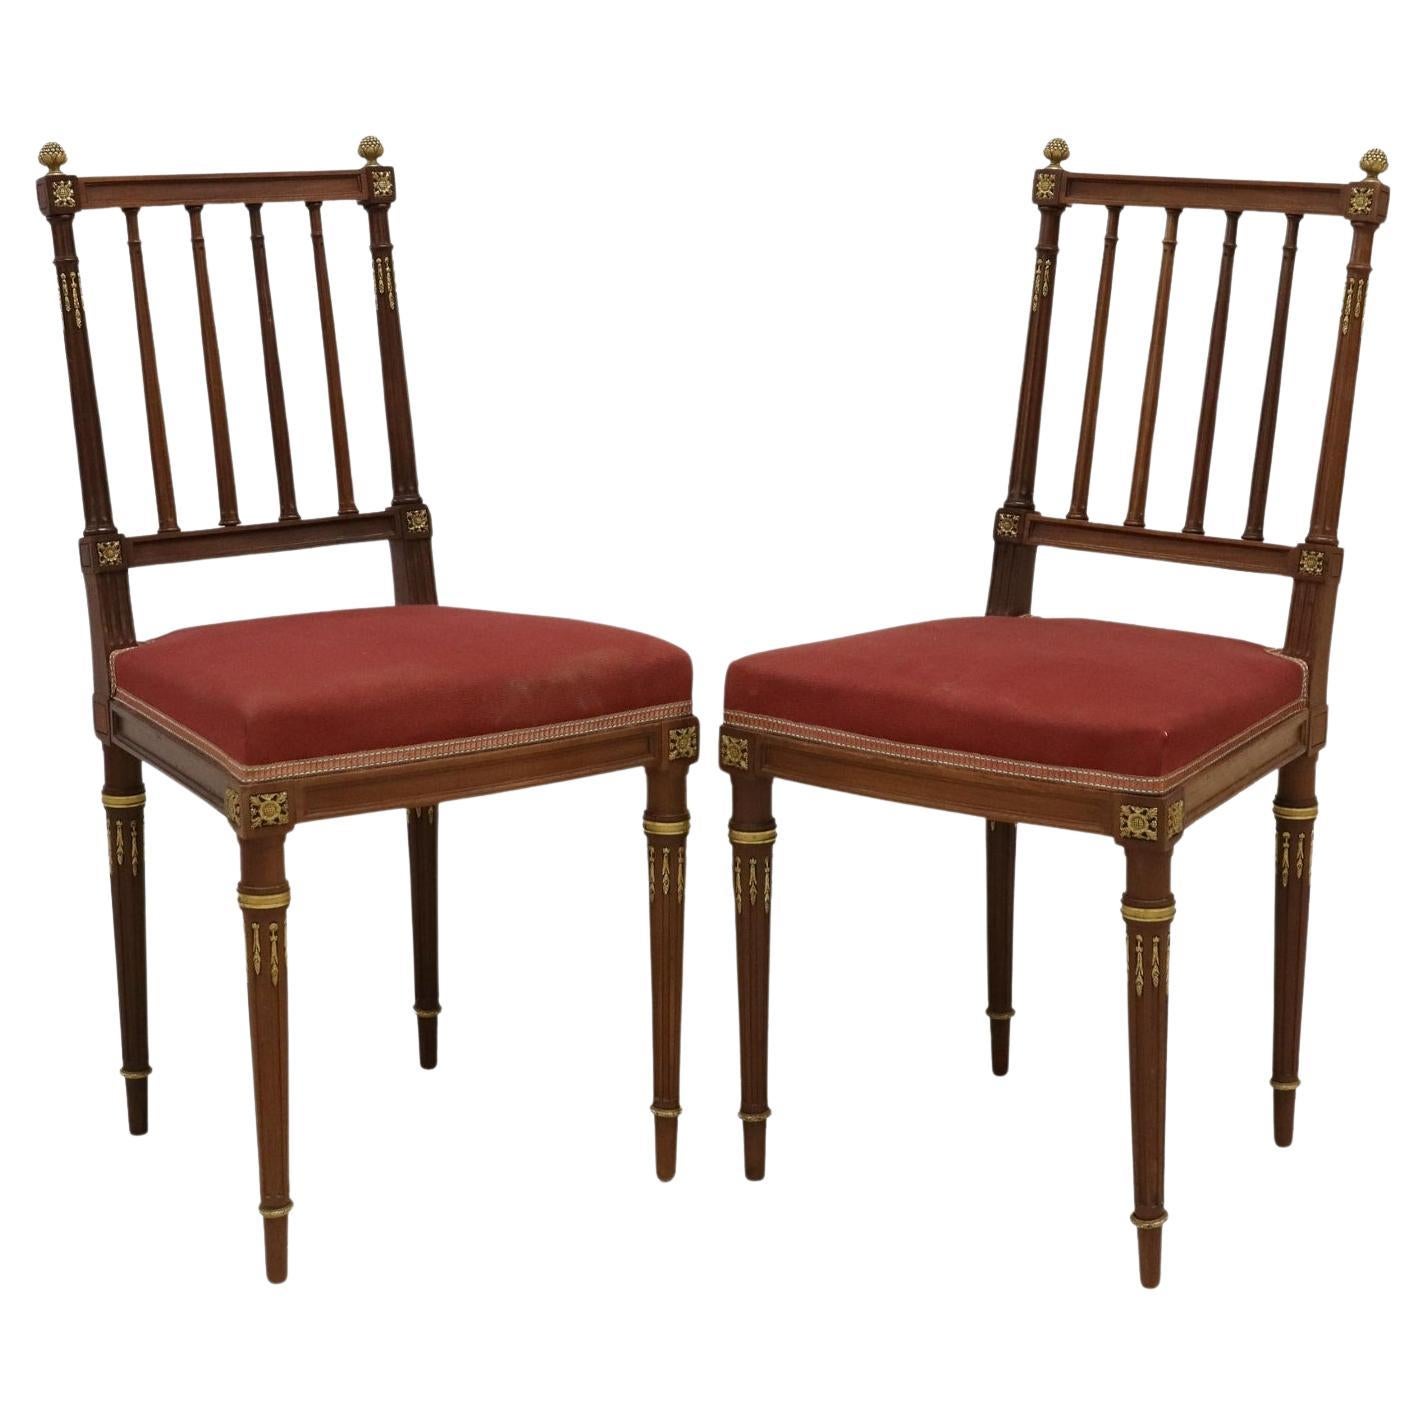 Maison Krieger French Louis XVI Style Ormolu Mounted Mahogany Side Chair Pair 